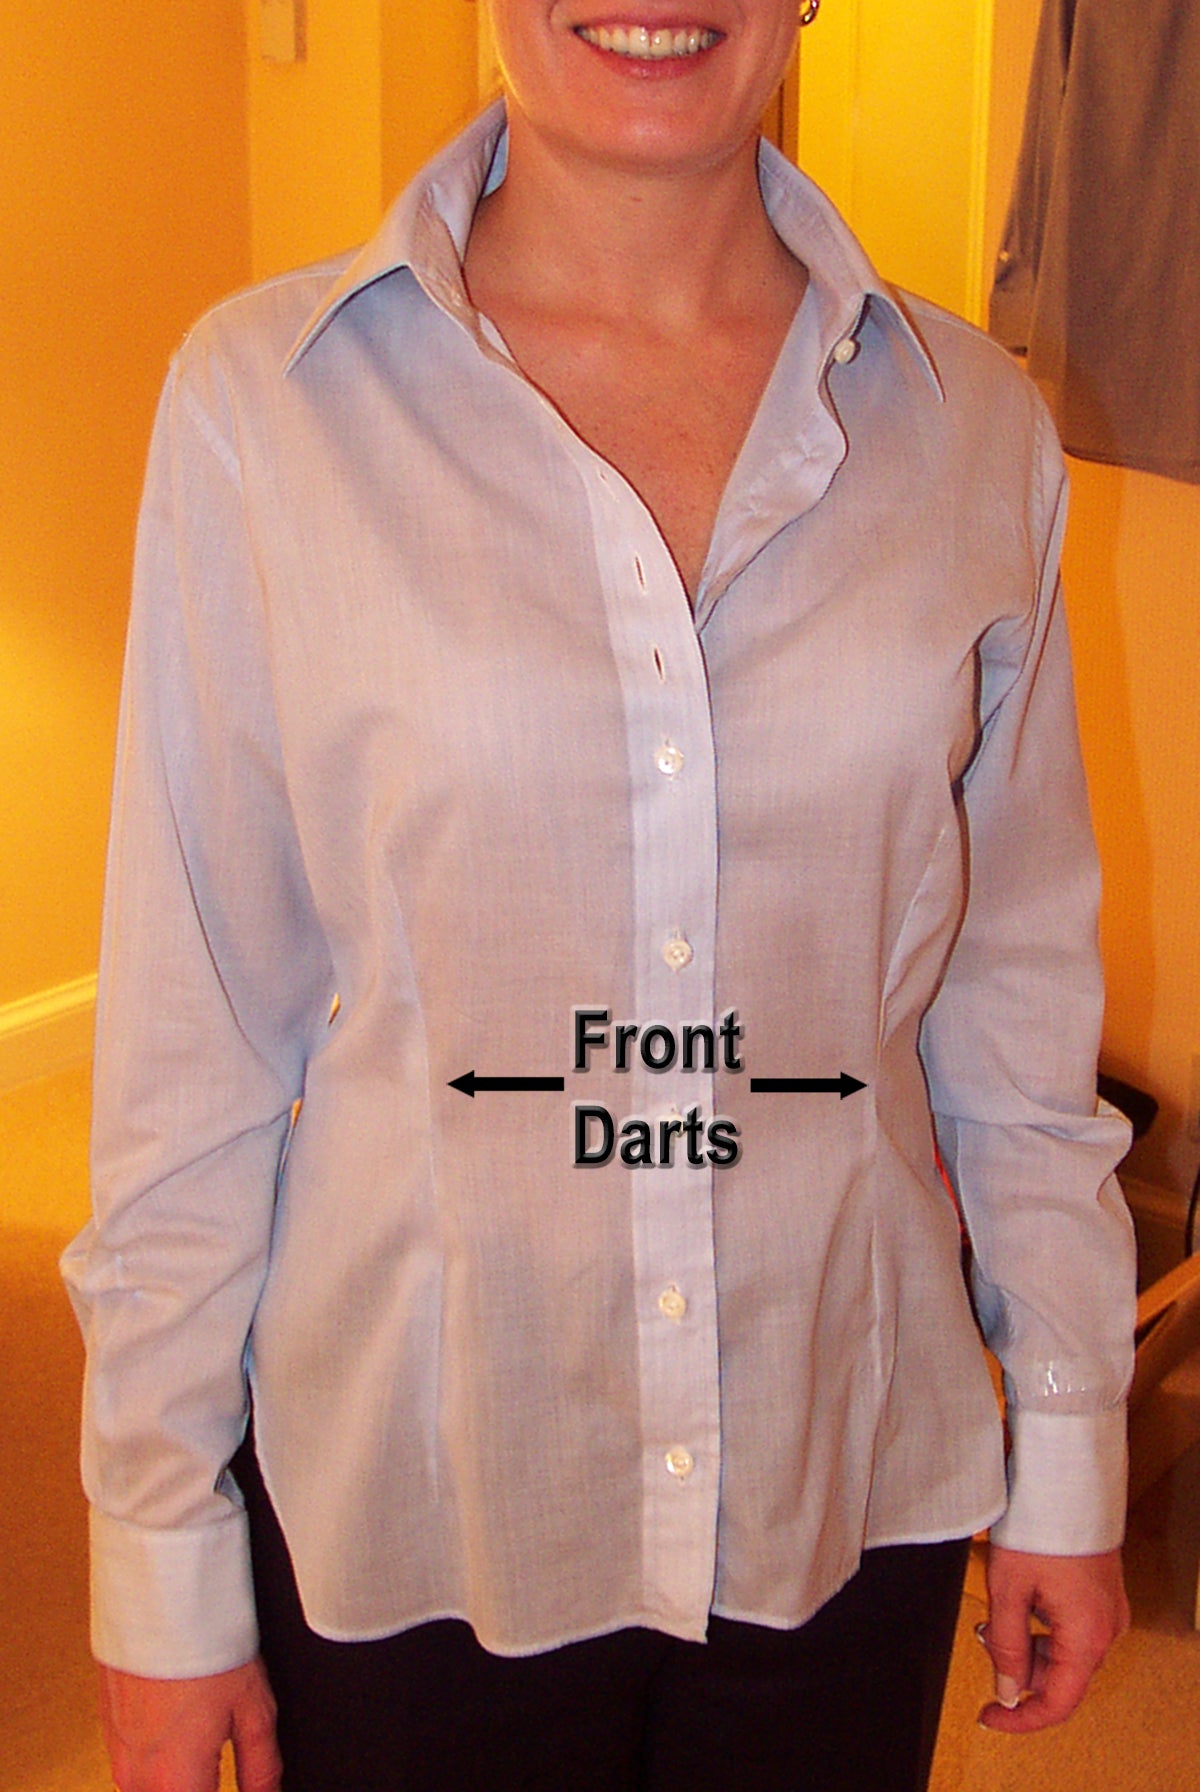 Shirt/Blouse/Jacket Fitting Series Part 2 - Fitting The Body